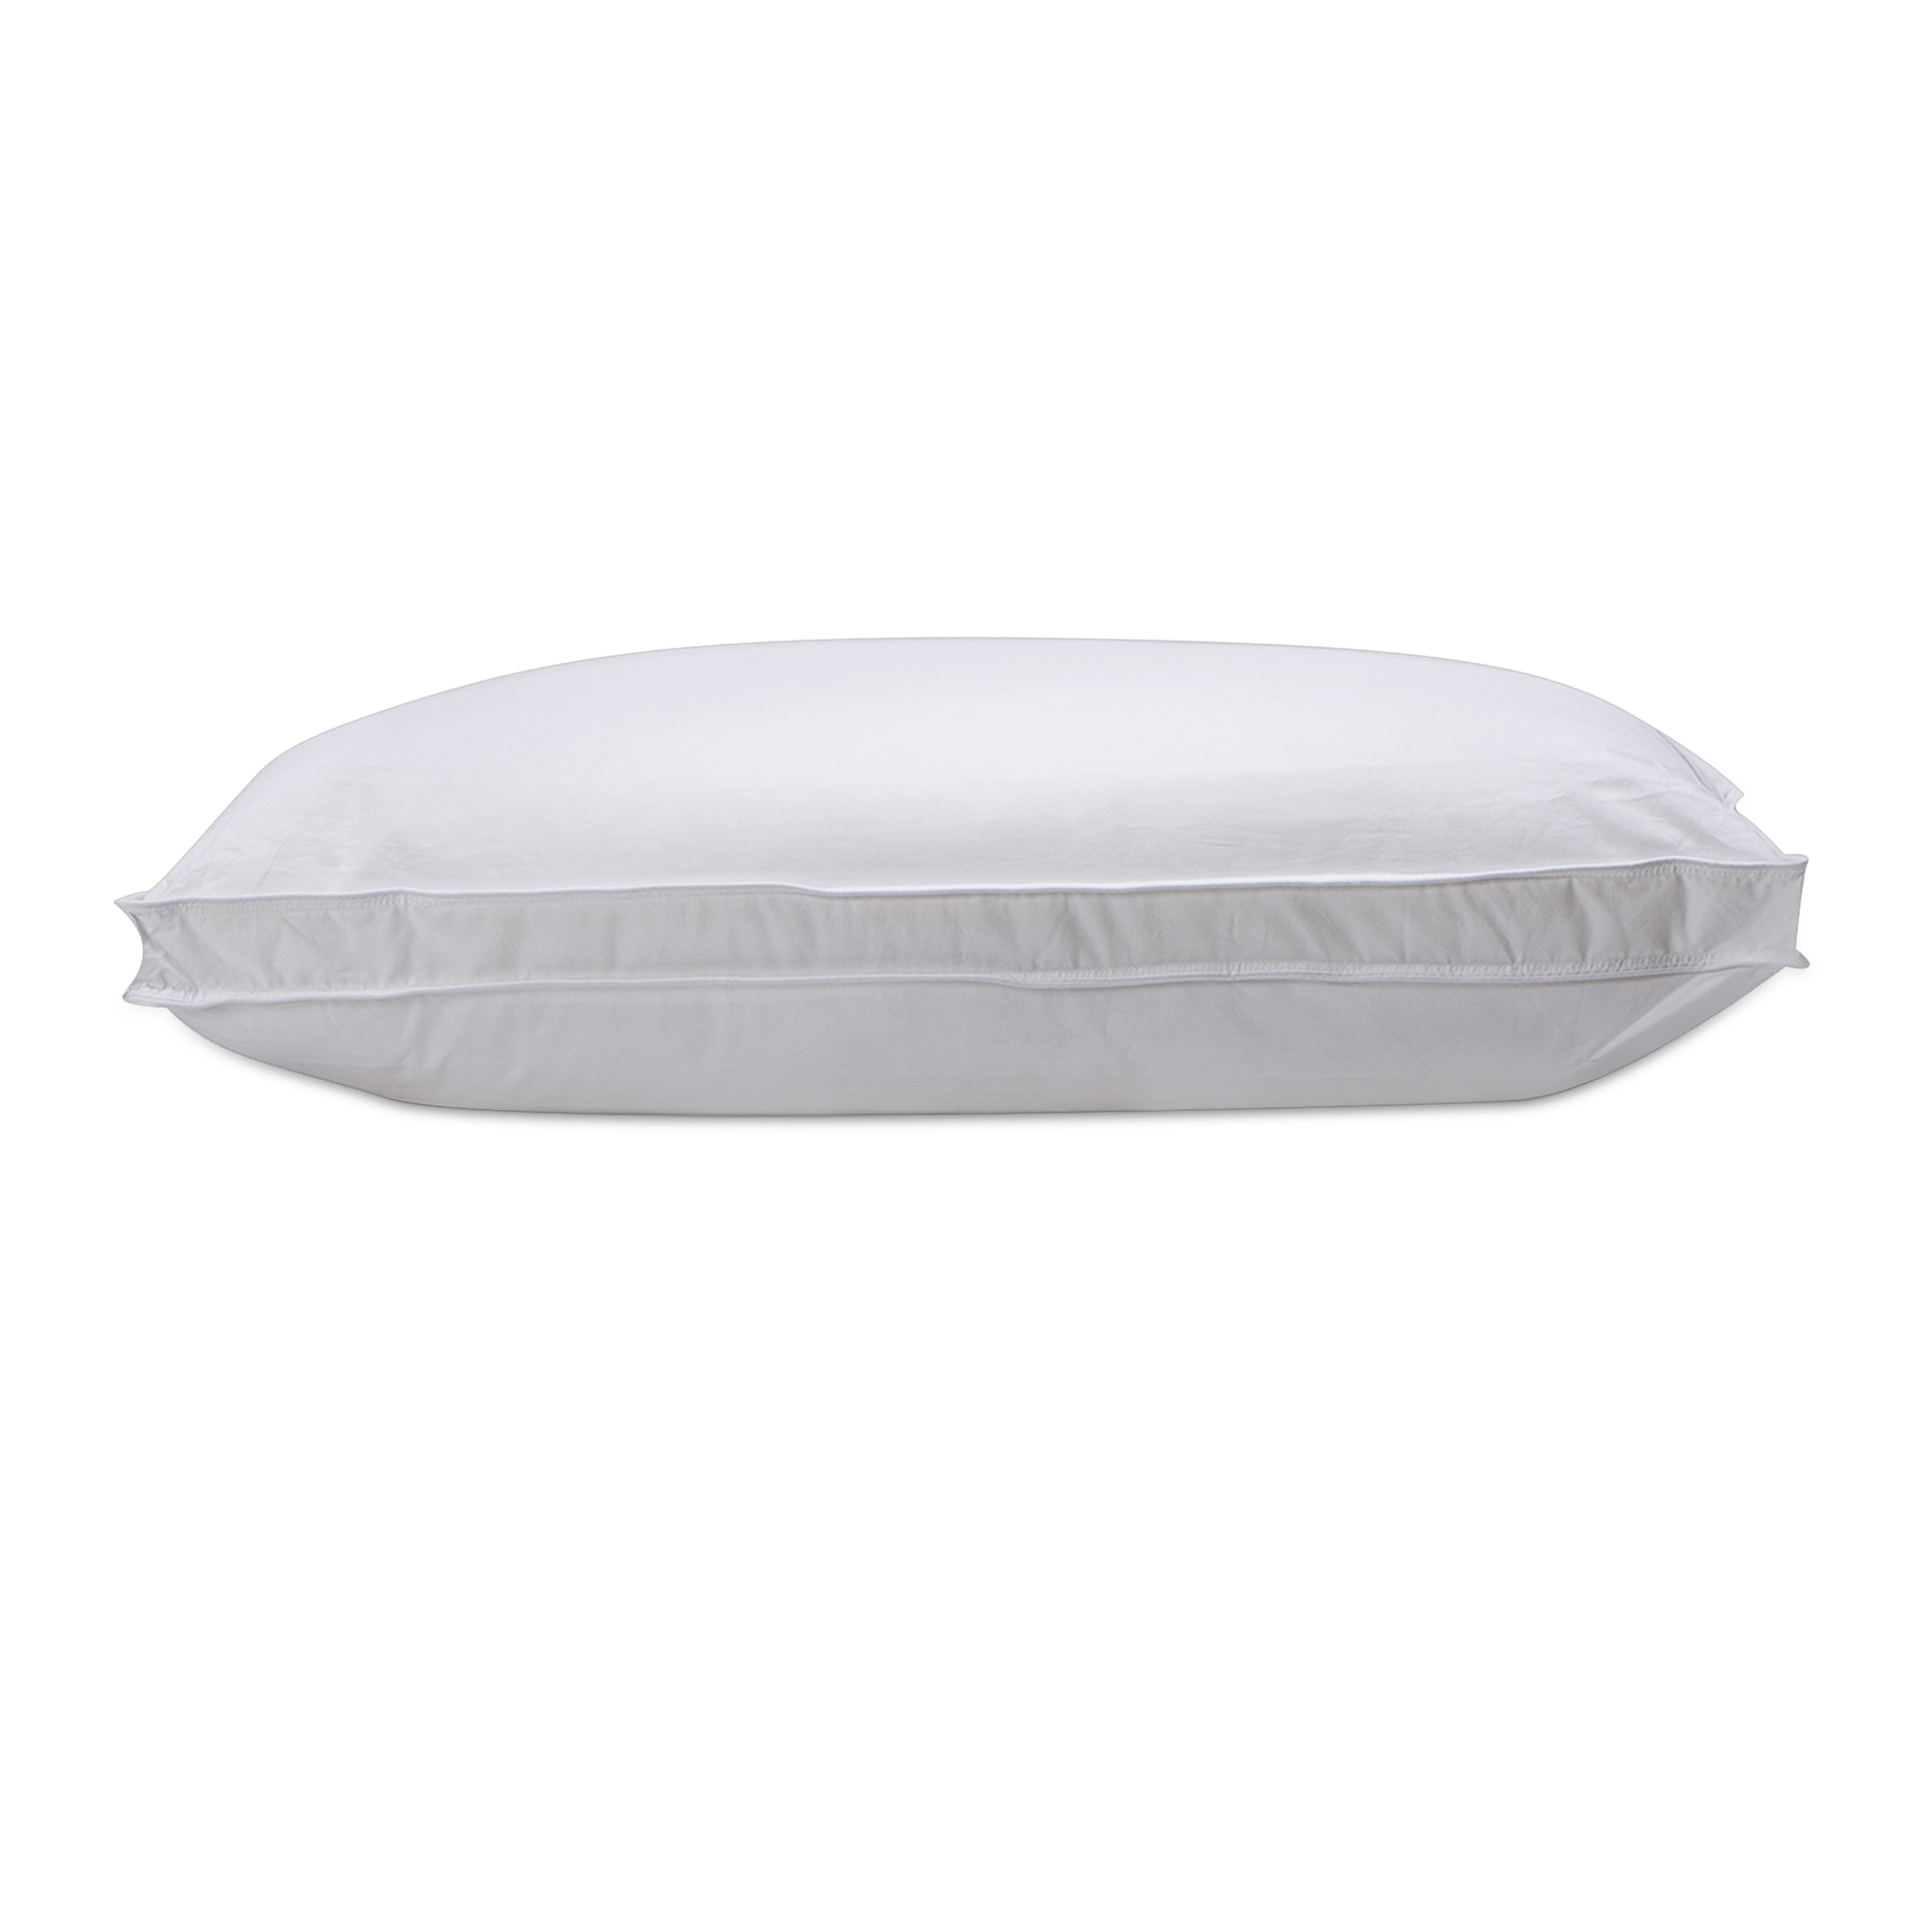 Refined Pillow (2-pack)